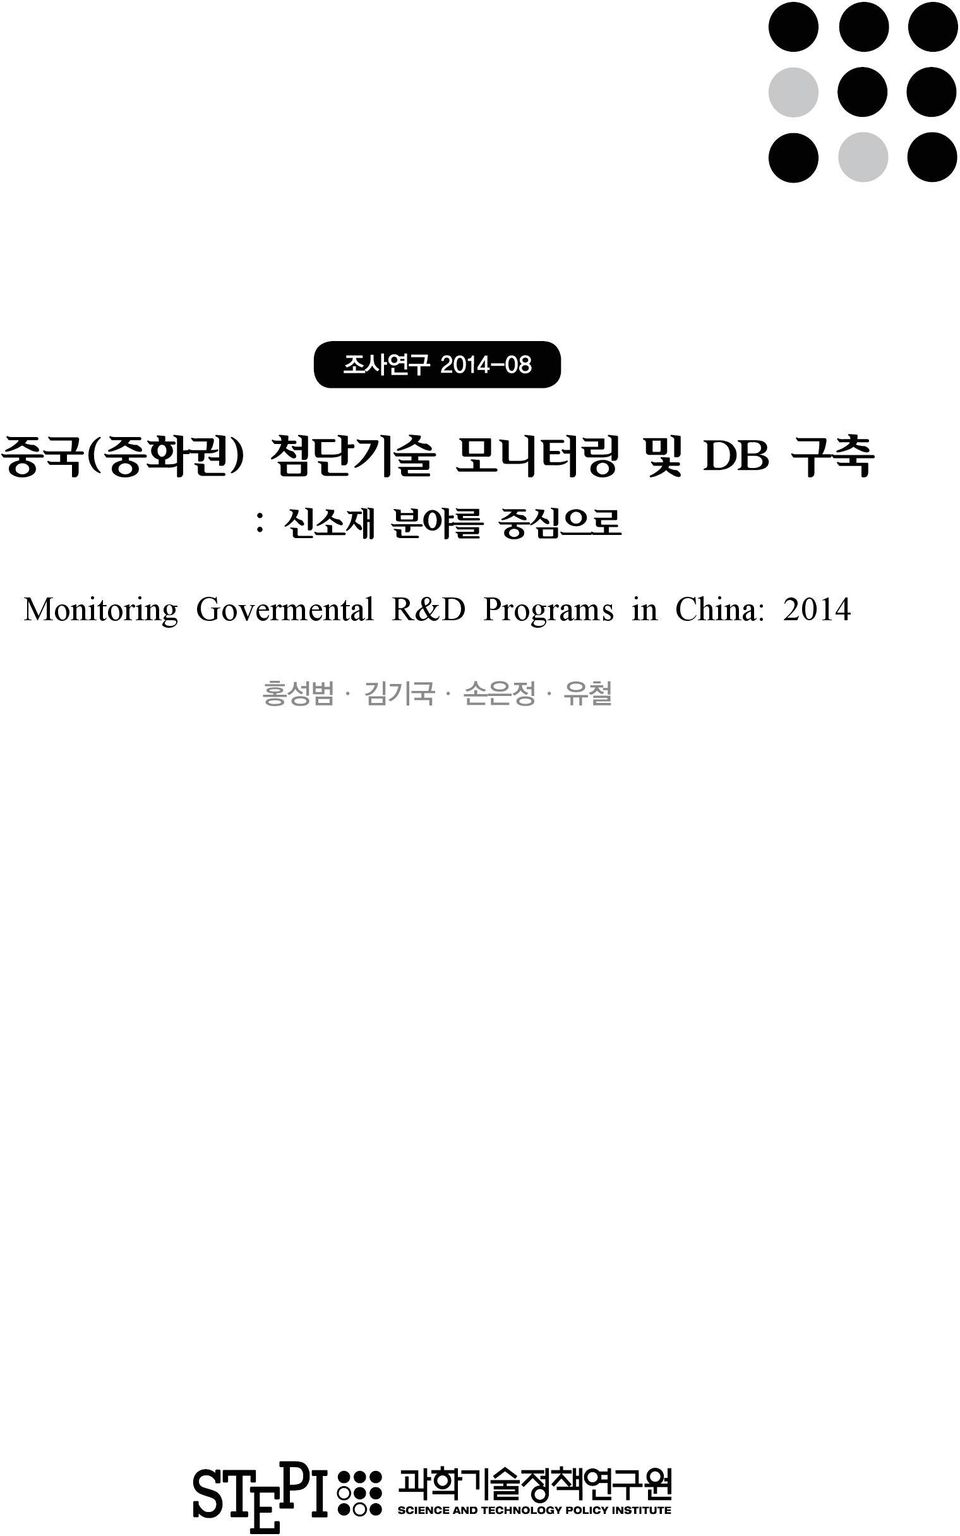 Monitoring Govermental R&D